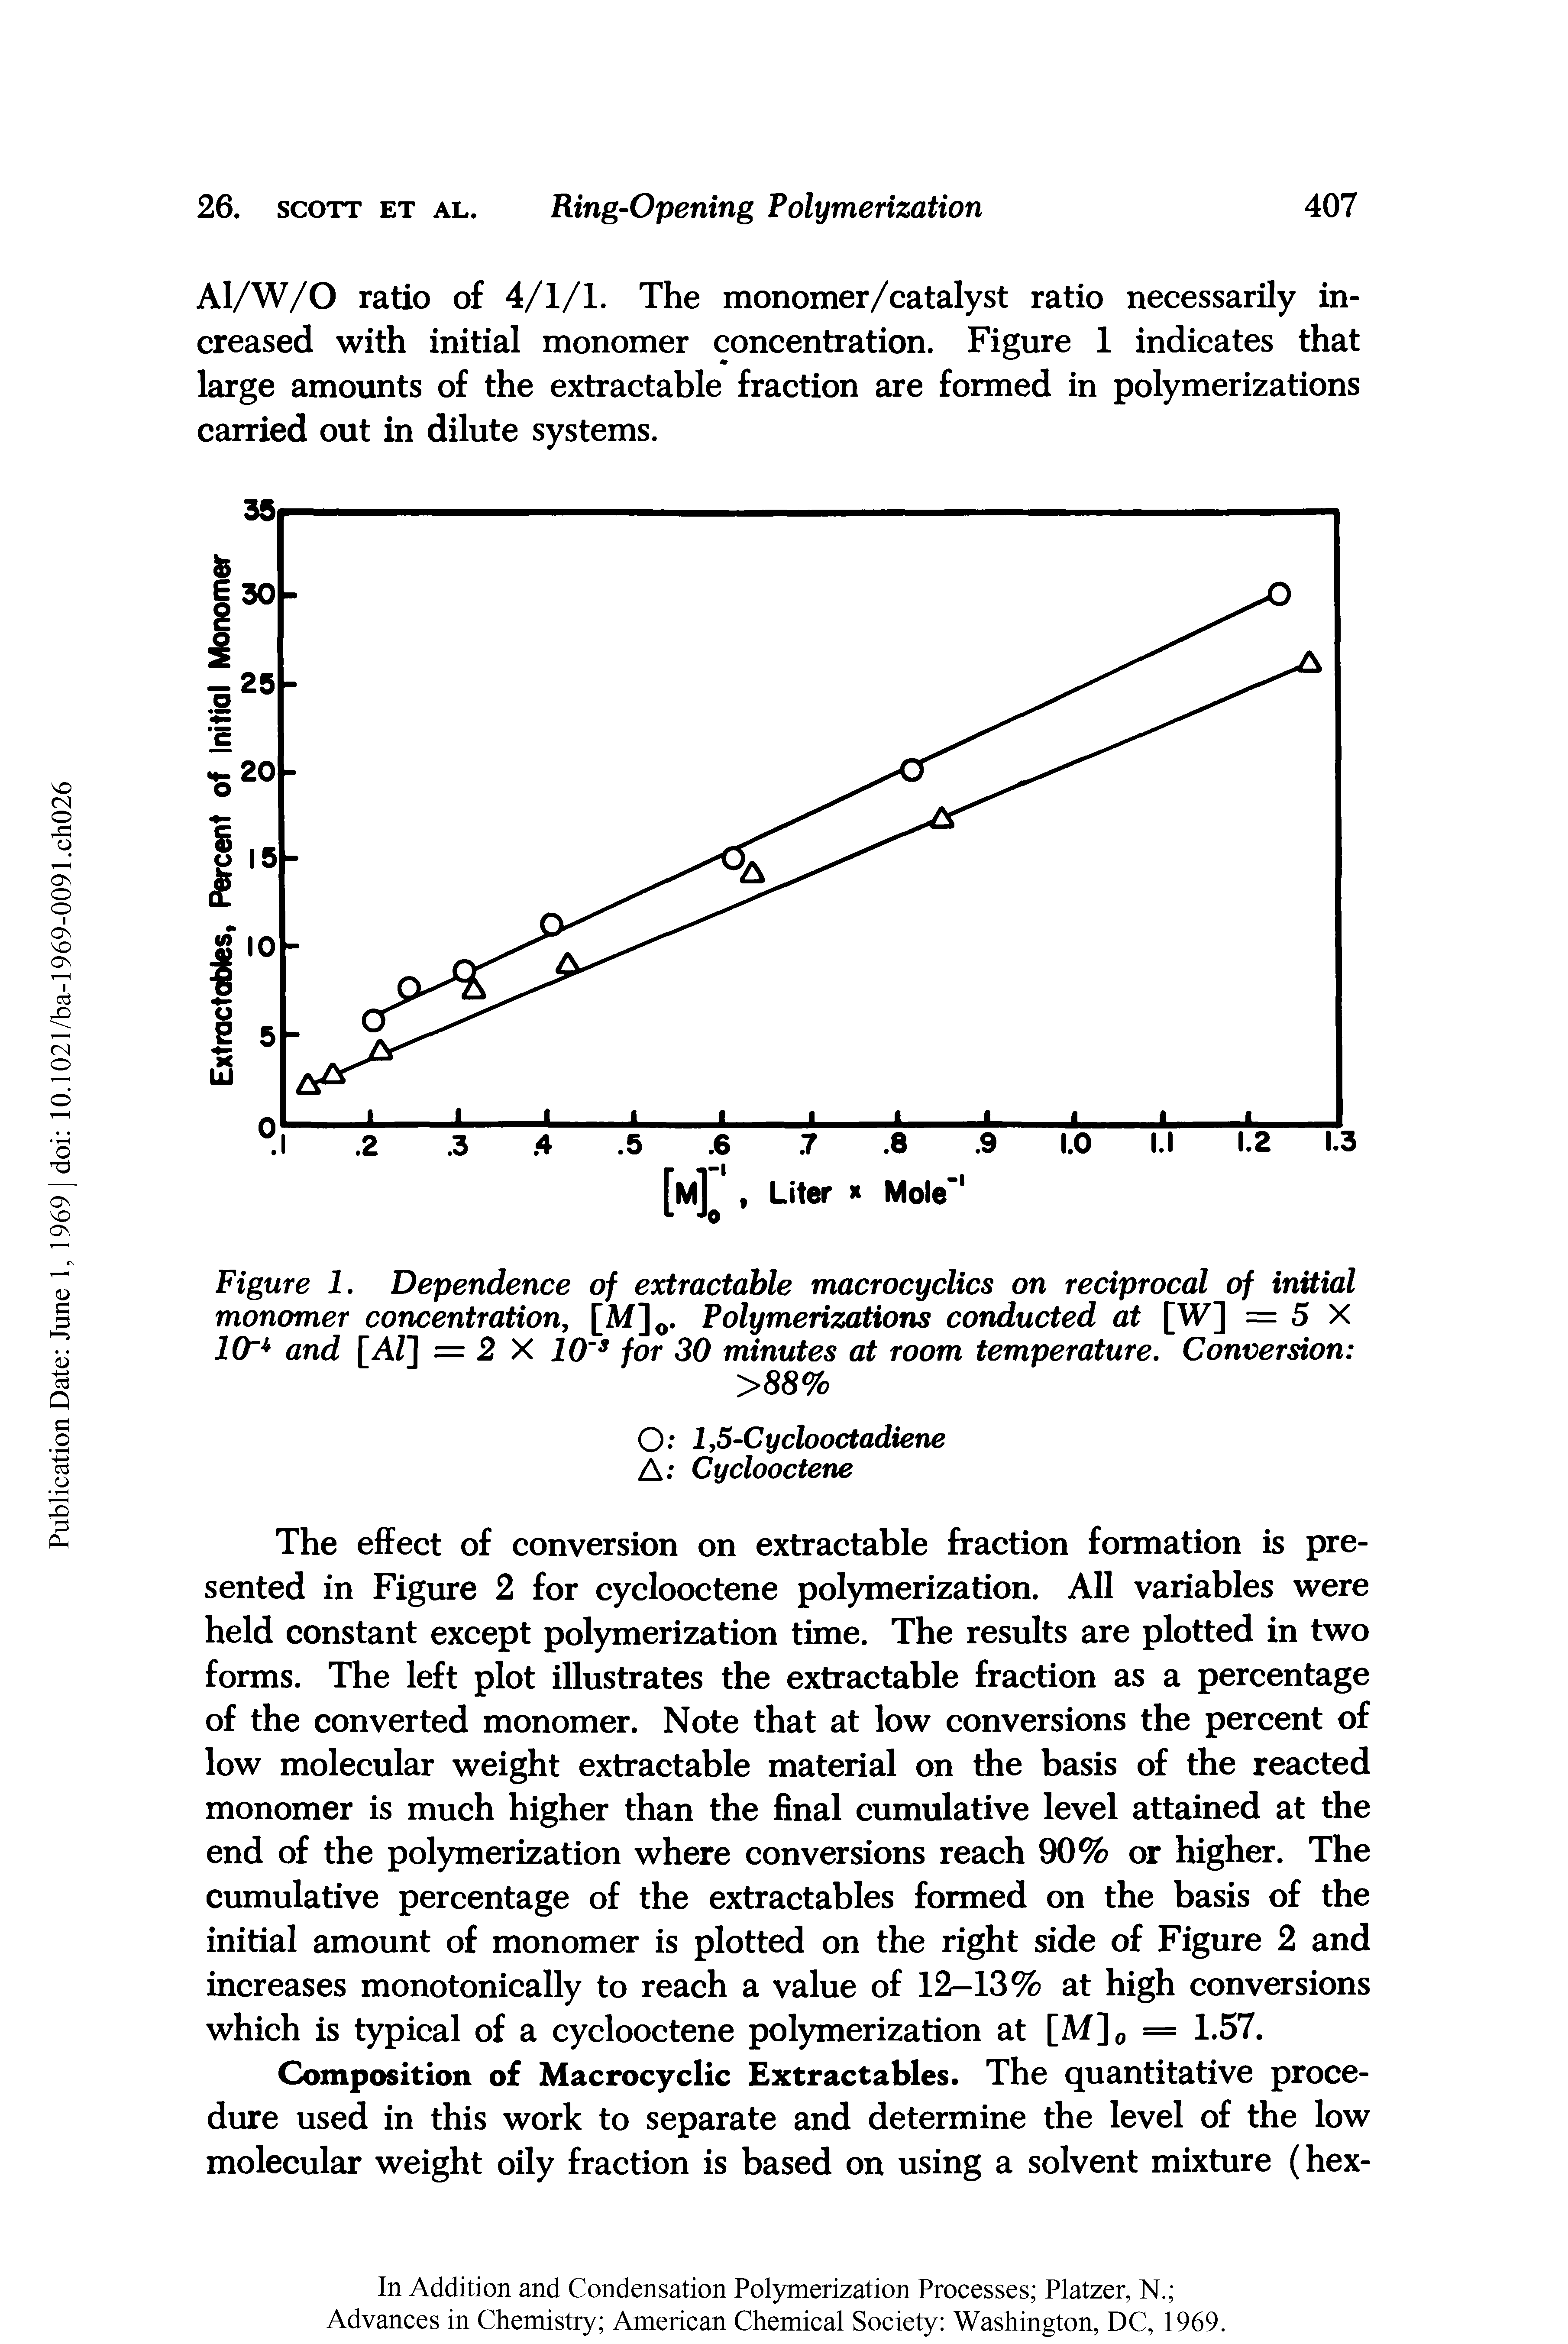 Figure 1. Dependence of extractable macrocyclics on reciprocal of initial monomer concentration, [M]0. Polymerizations conducted at [W] = 5 X 10r4 and [A/] = 2 X 10 3 for 30 minutes at room temperature. Conversion ...